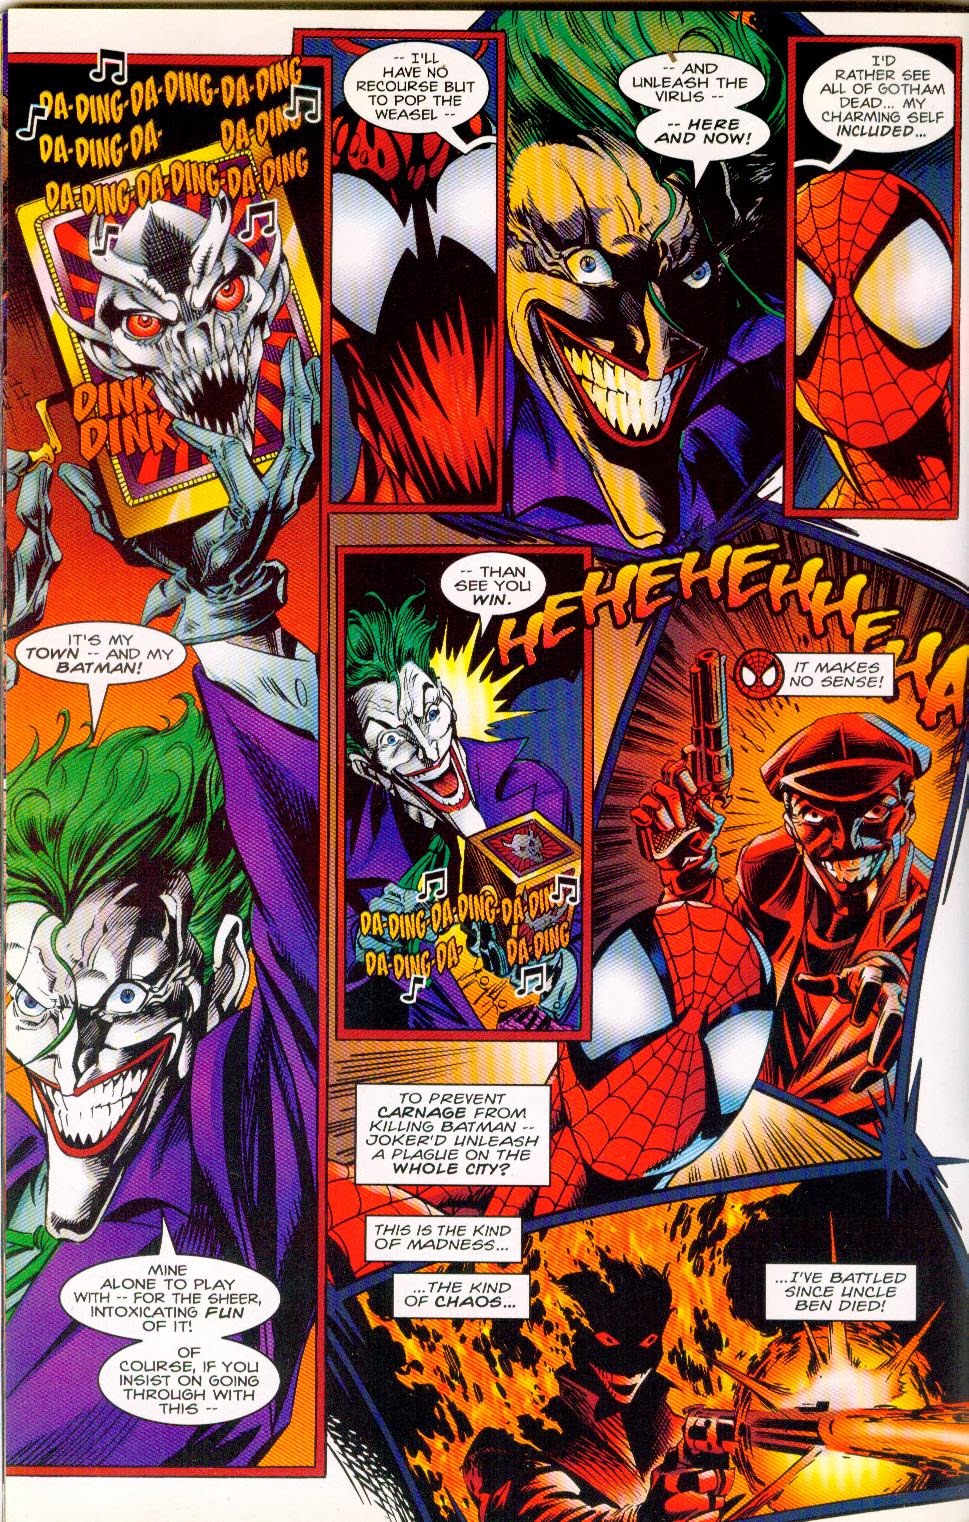 Spider-Man and Batman Crossover Comic Book Marvel DC Disordered Minds Joker  